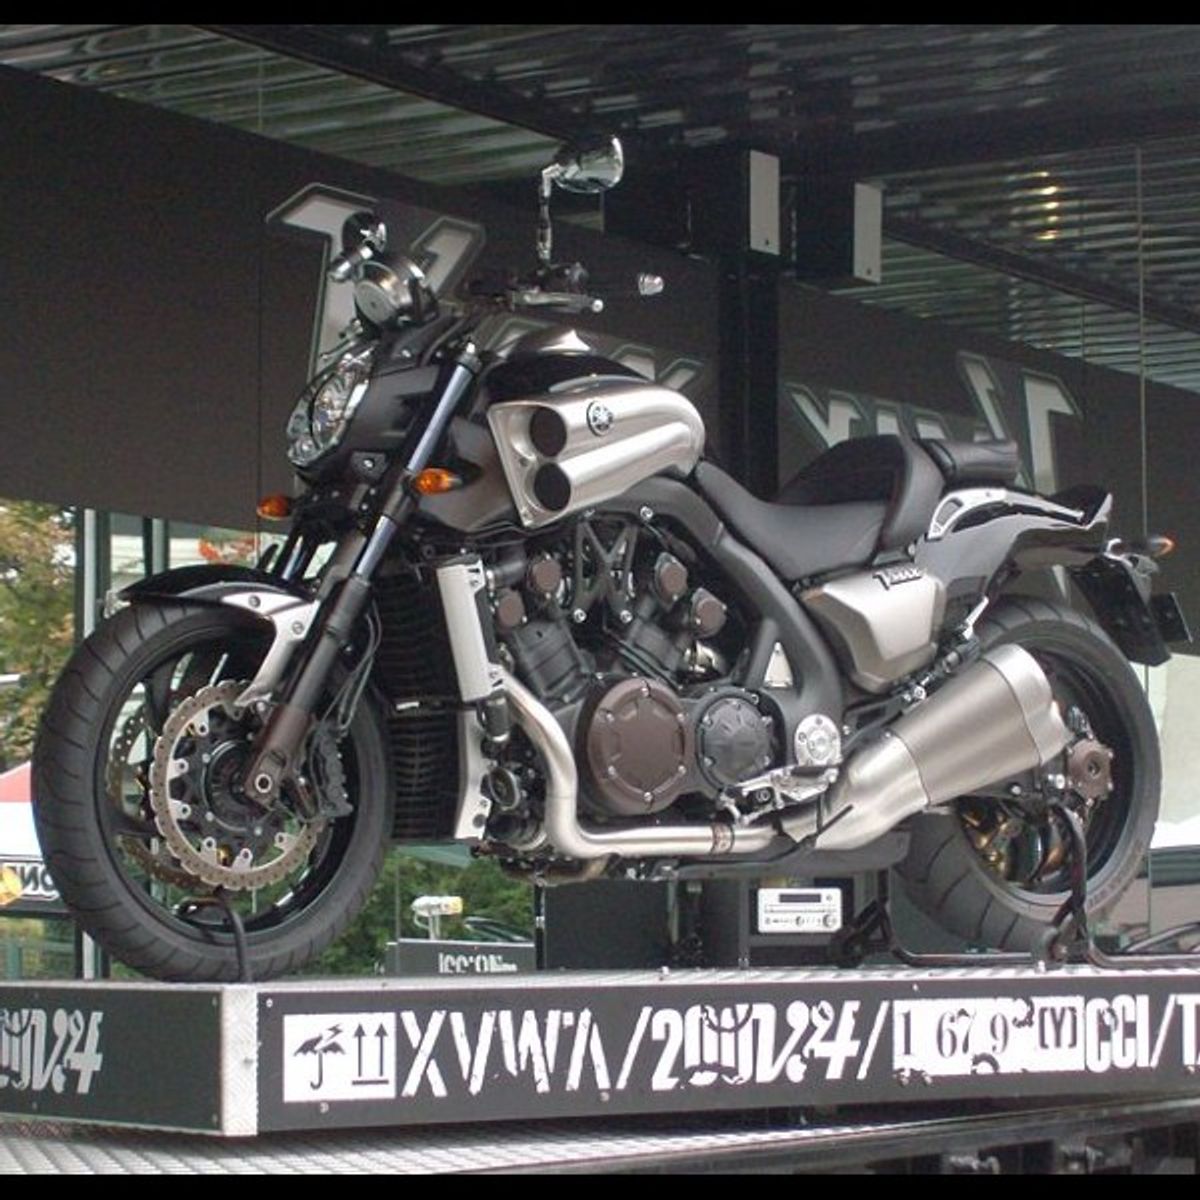 5 Things We Loved About The Yamaha VMAX Cruiser